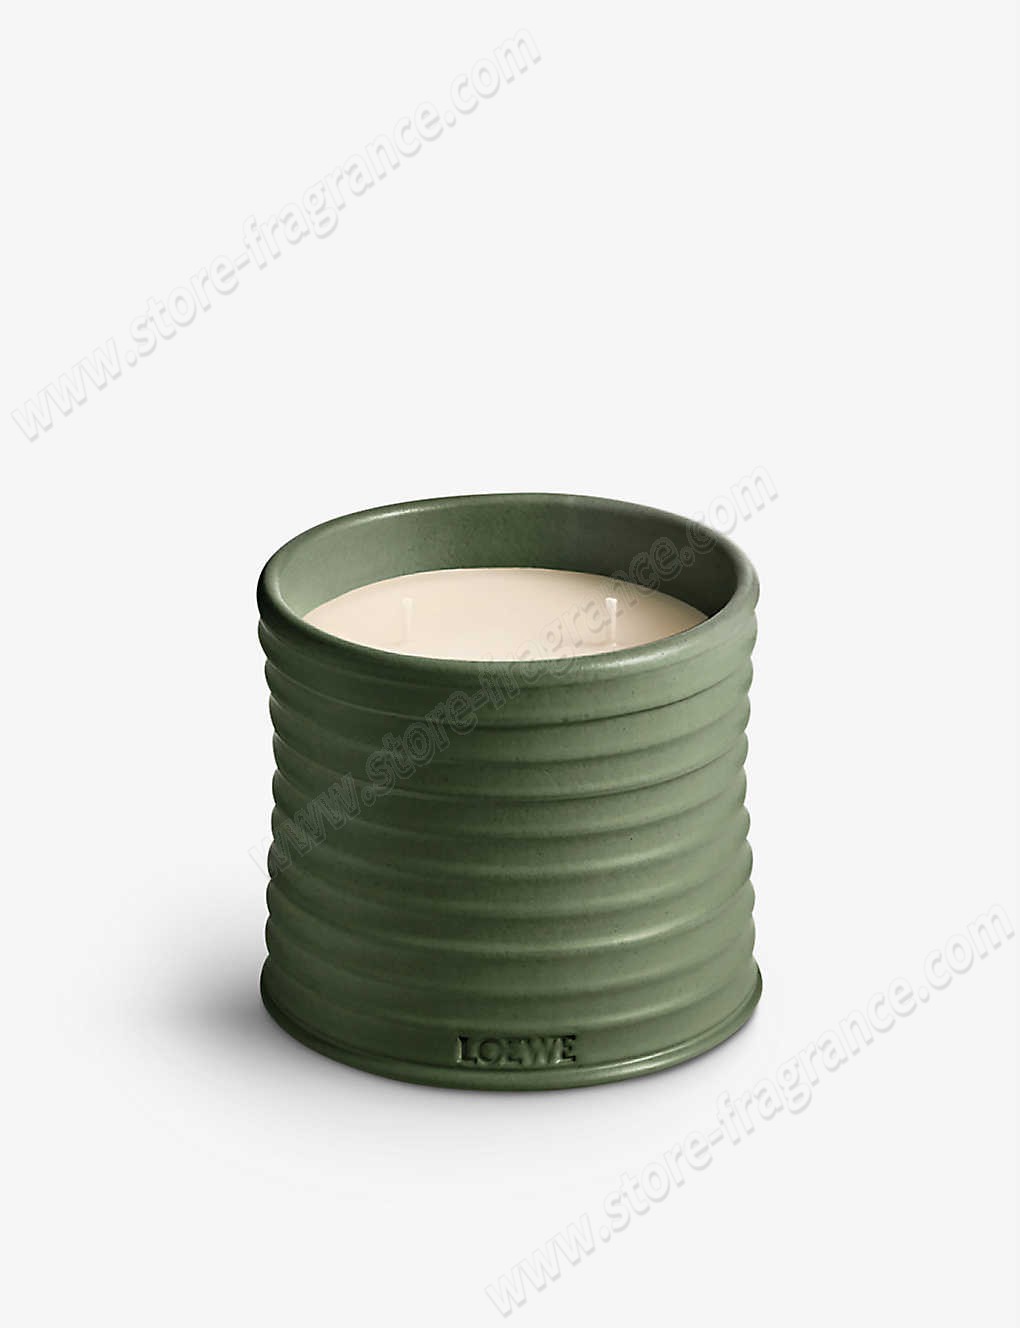 LOEWE/Scent of Marihuana medium scented candle 1.15kg ✿ Discount Store - LOEWE/Scent of Marihuana medium scented candle 1.15kg ✿ Discount Store